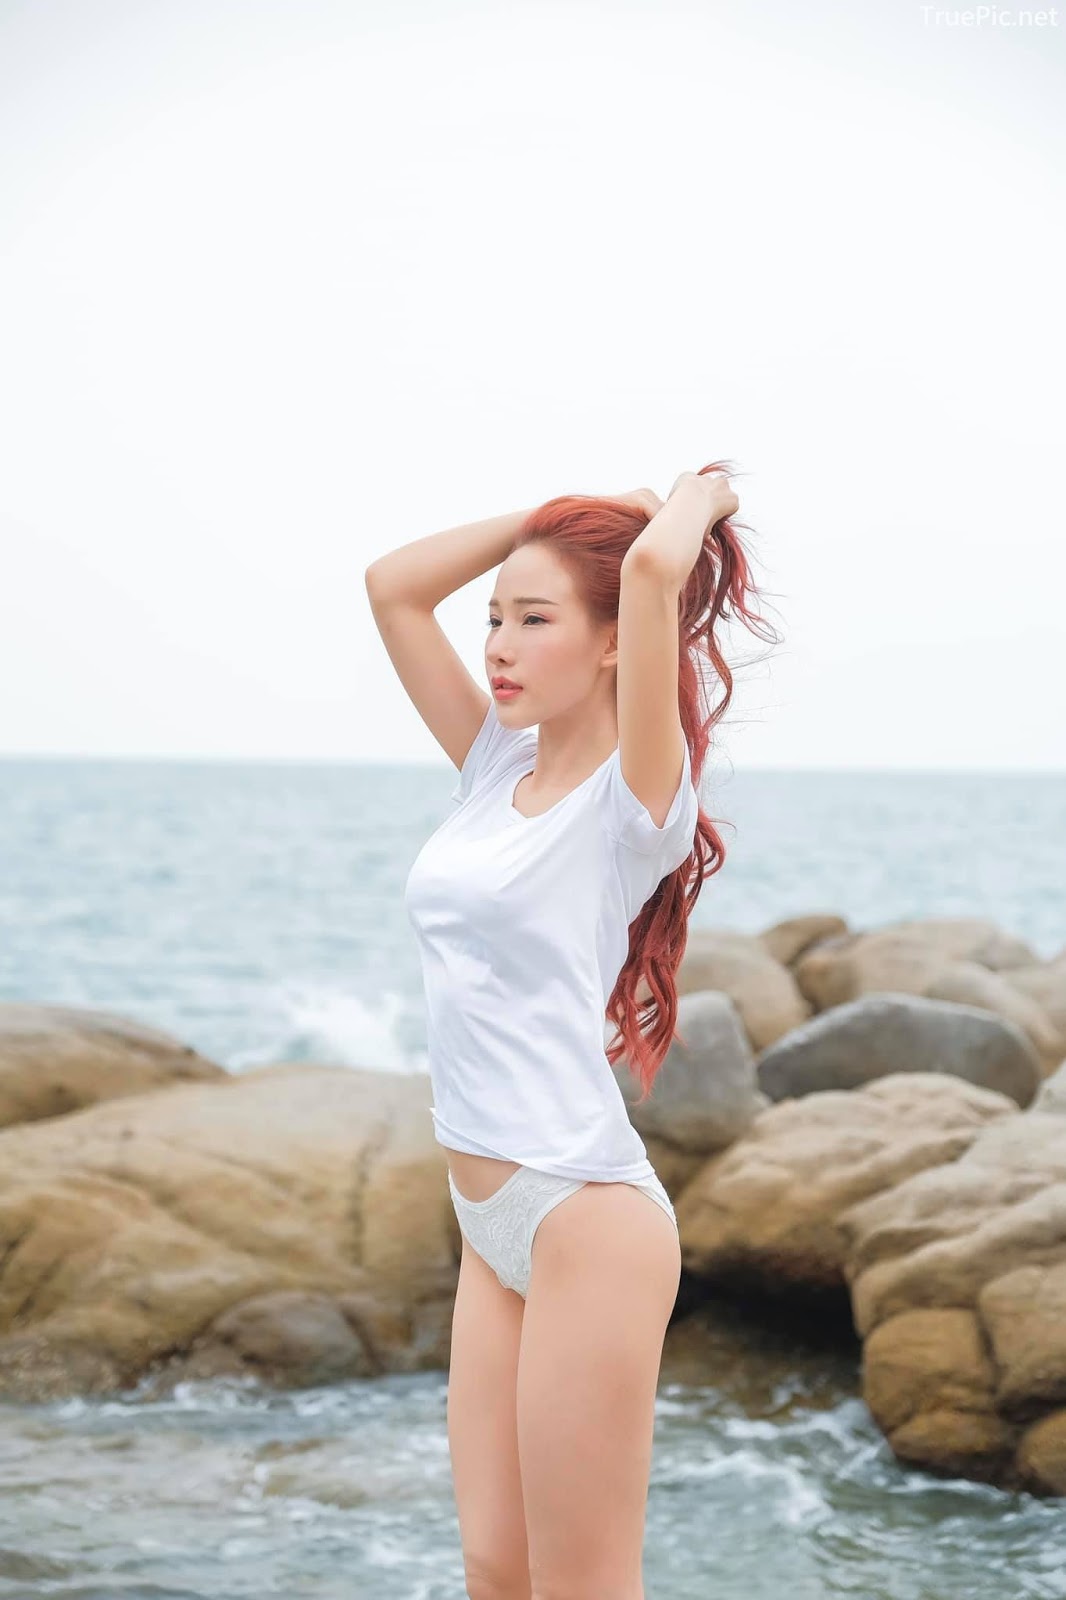 Thailand sexy model Arys Nam-in (Arysiacara) – The goddess of the sea - Picture 29